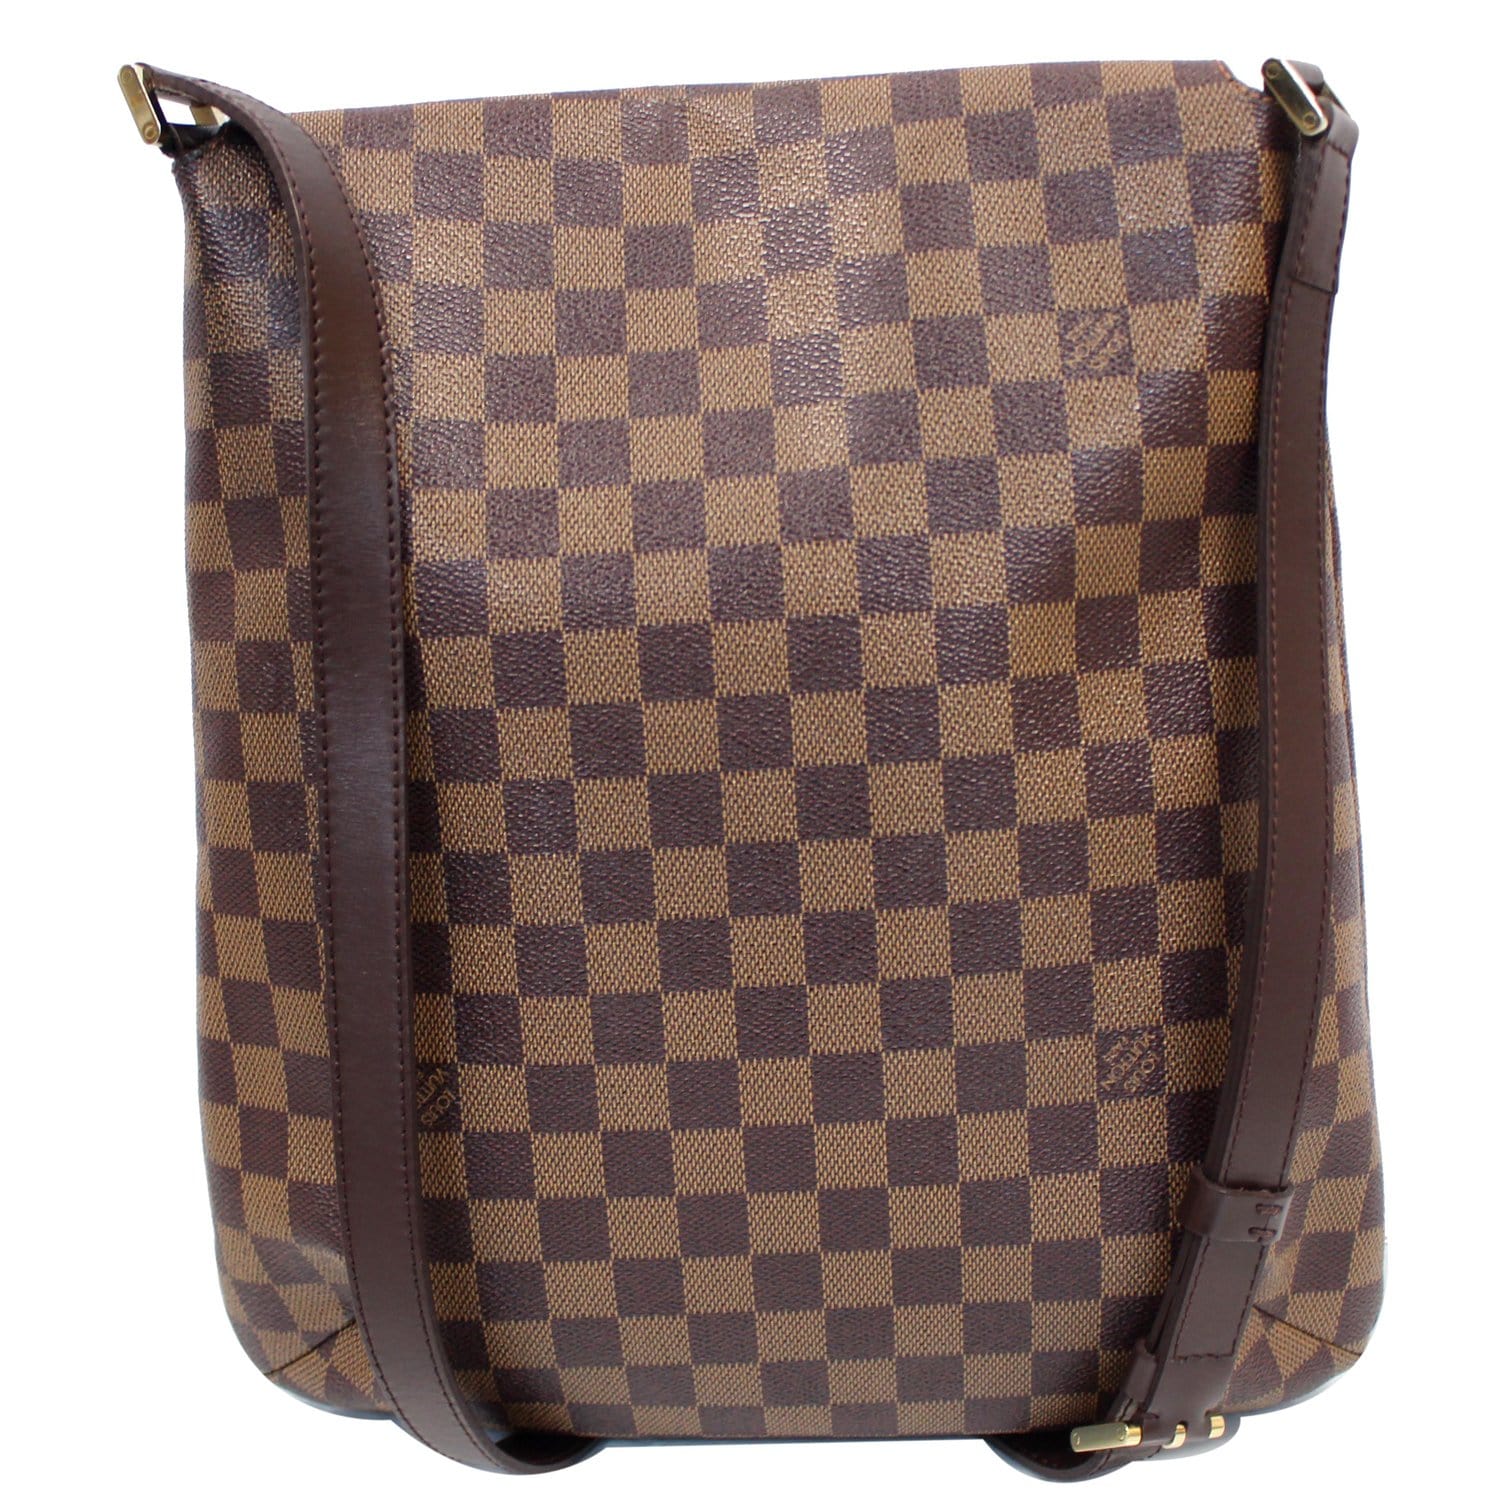 Louis Vuitton Musette Shoulder Bag in Ebene Damier Canvas and Brown